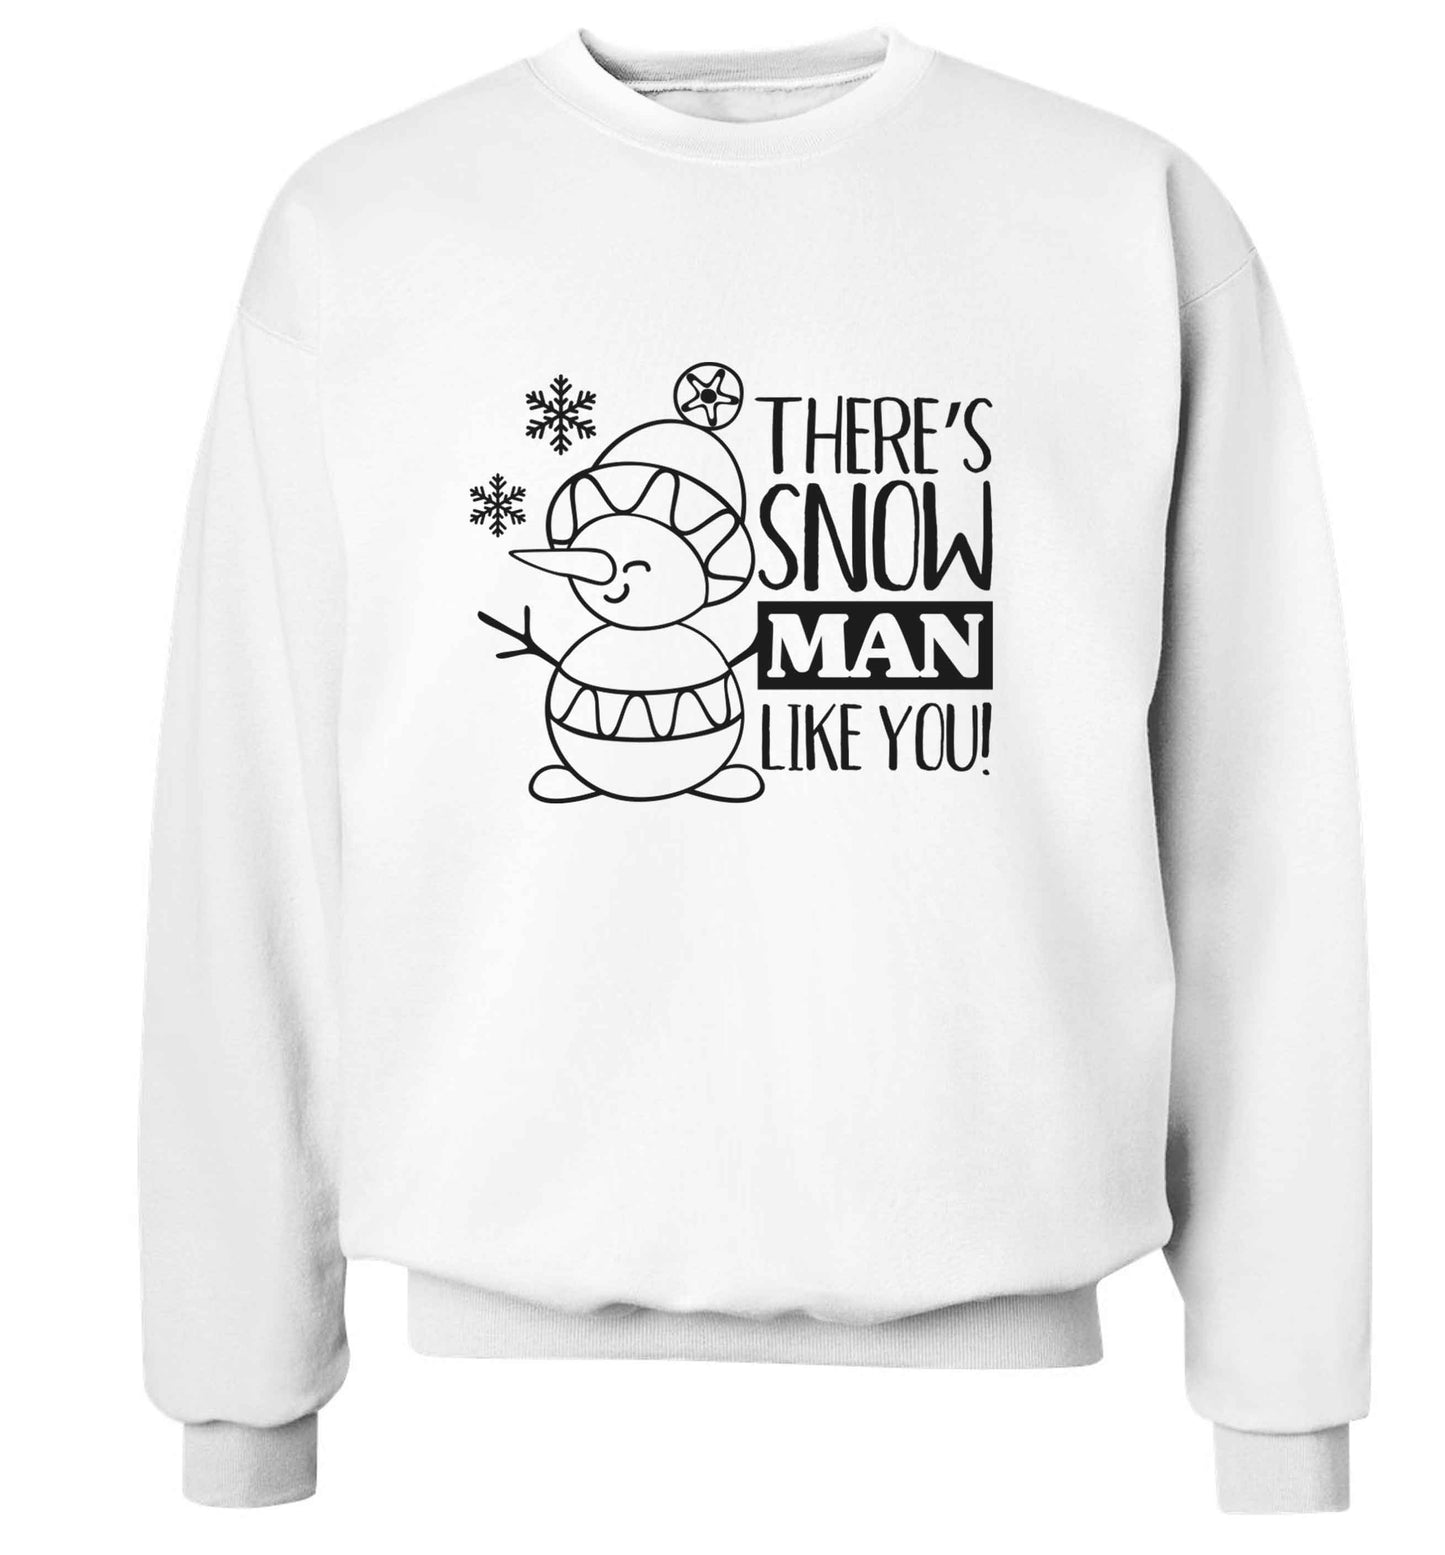 There's snow man like you adult's unisex white sweater 2XL